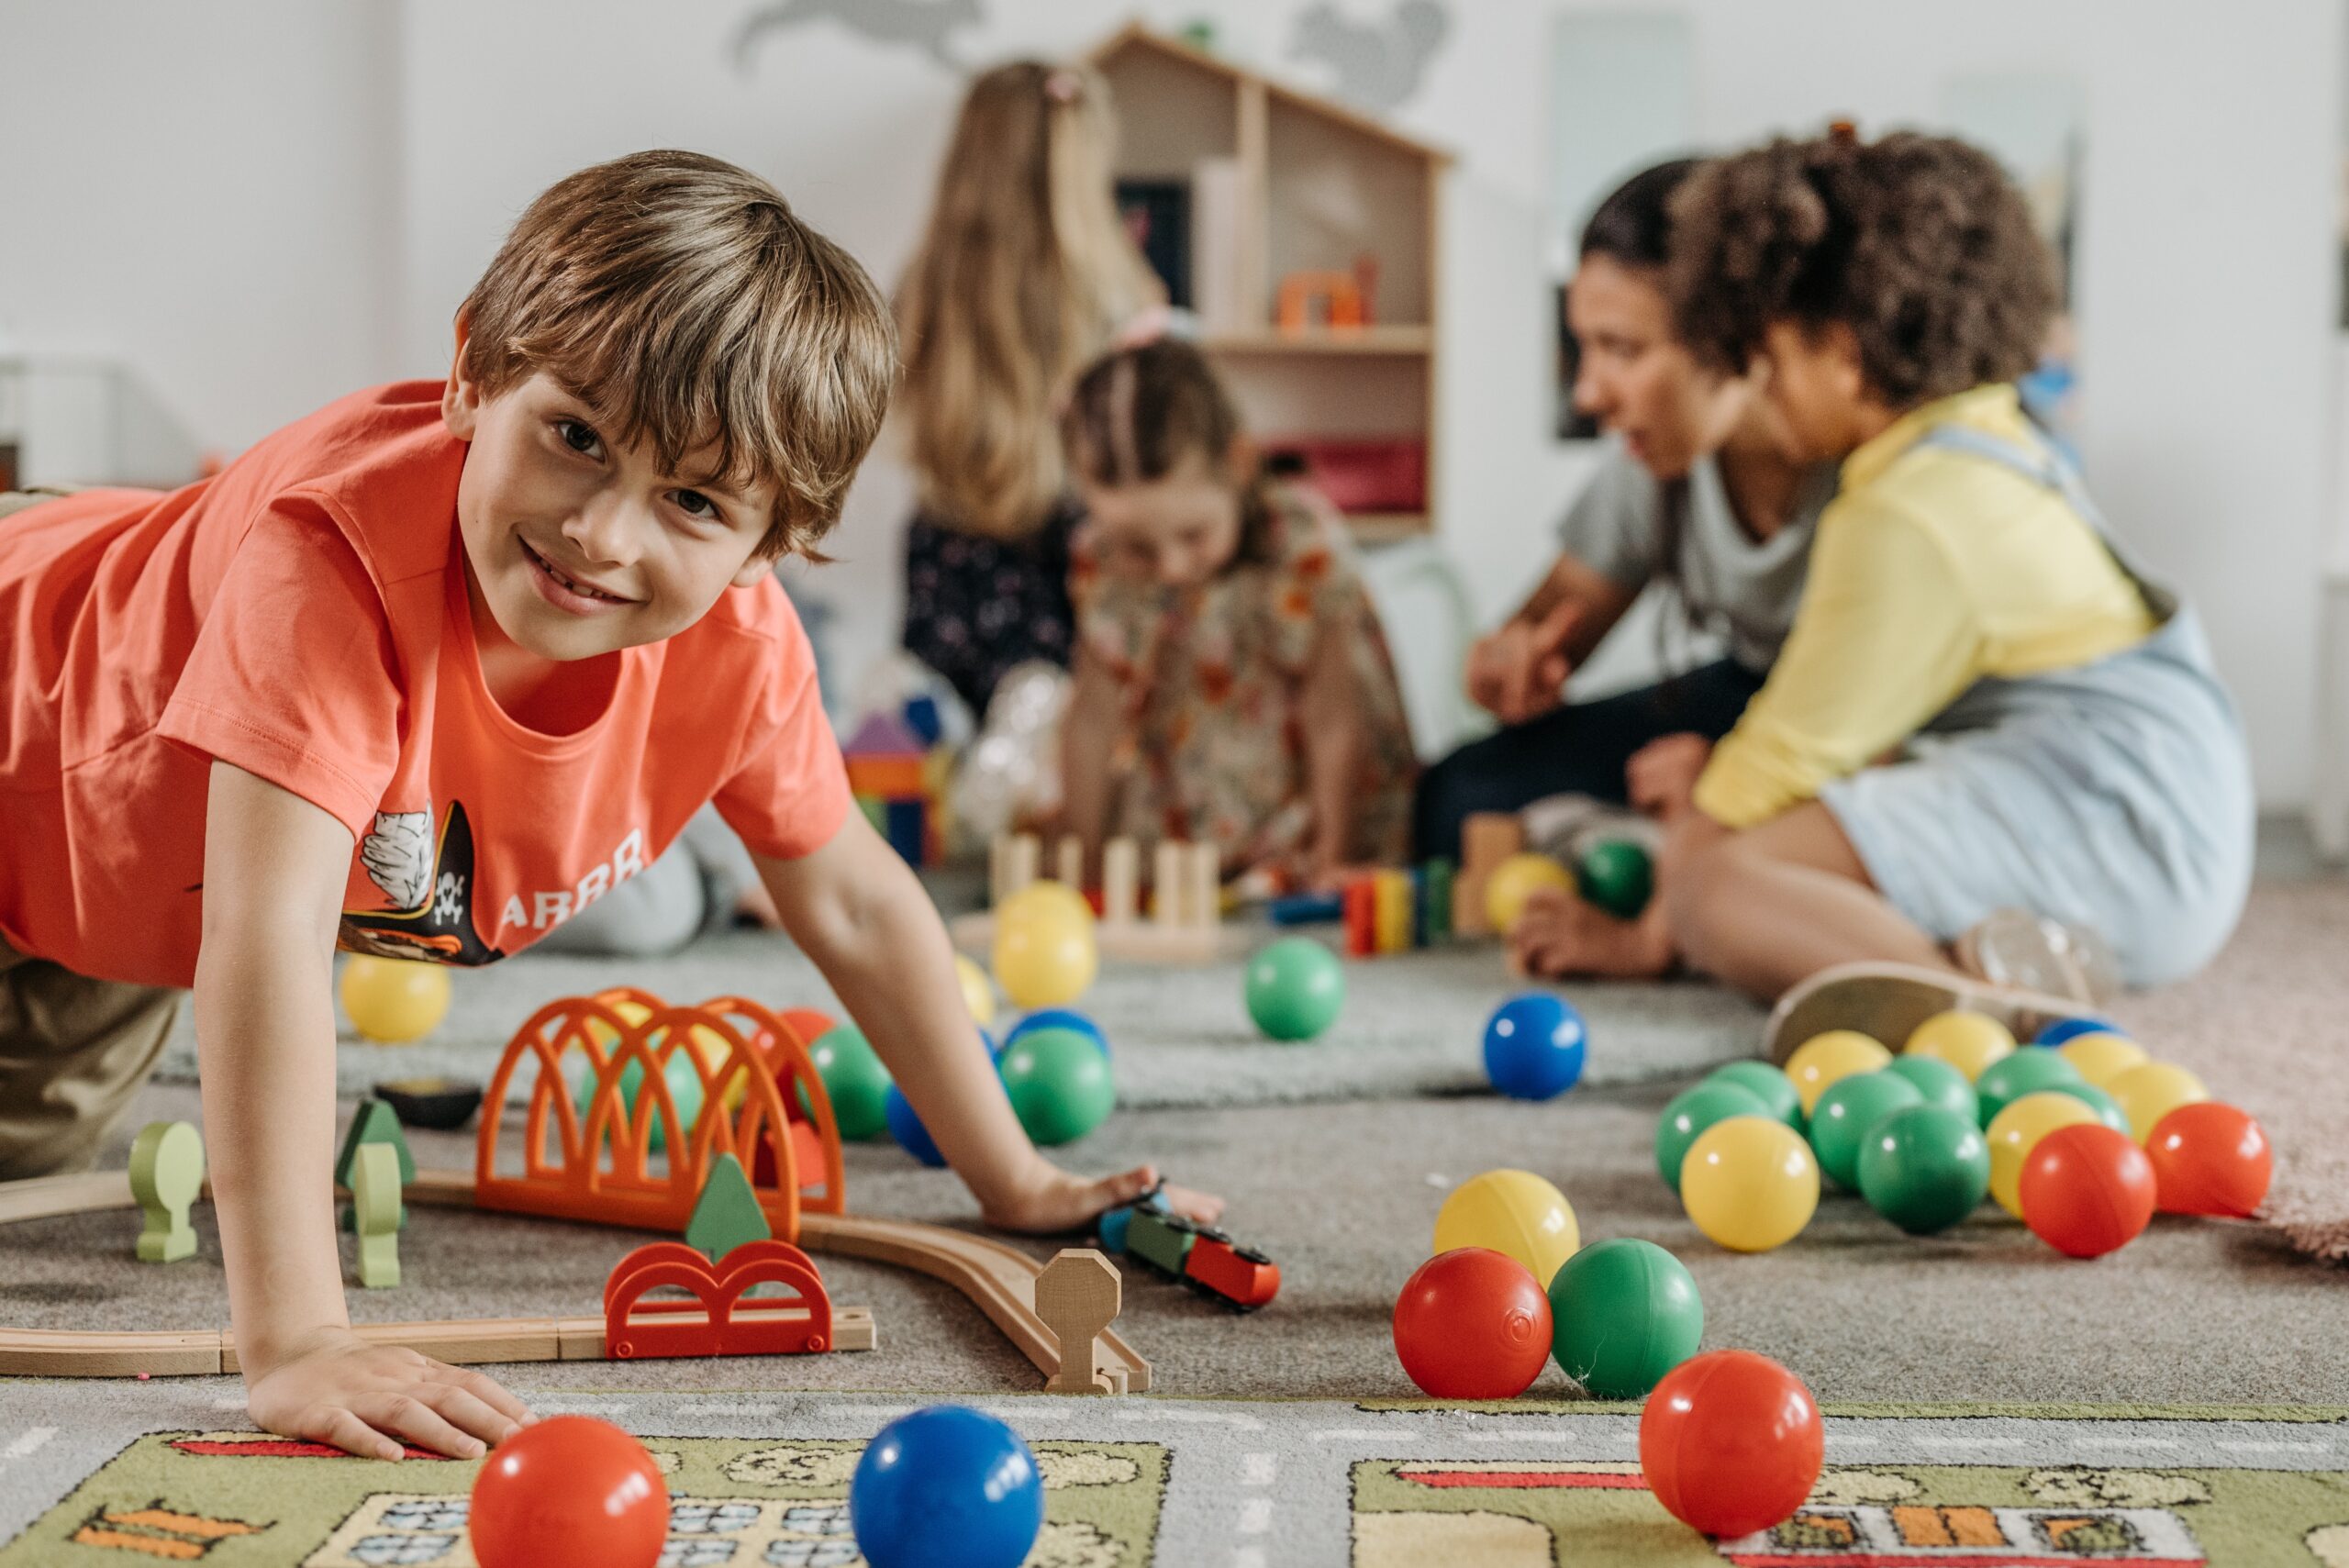 A young is happy playing with puzzles and balls, enjoying free play instead of structured activities.